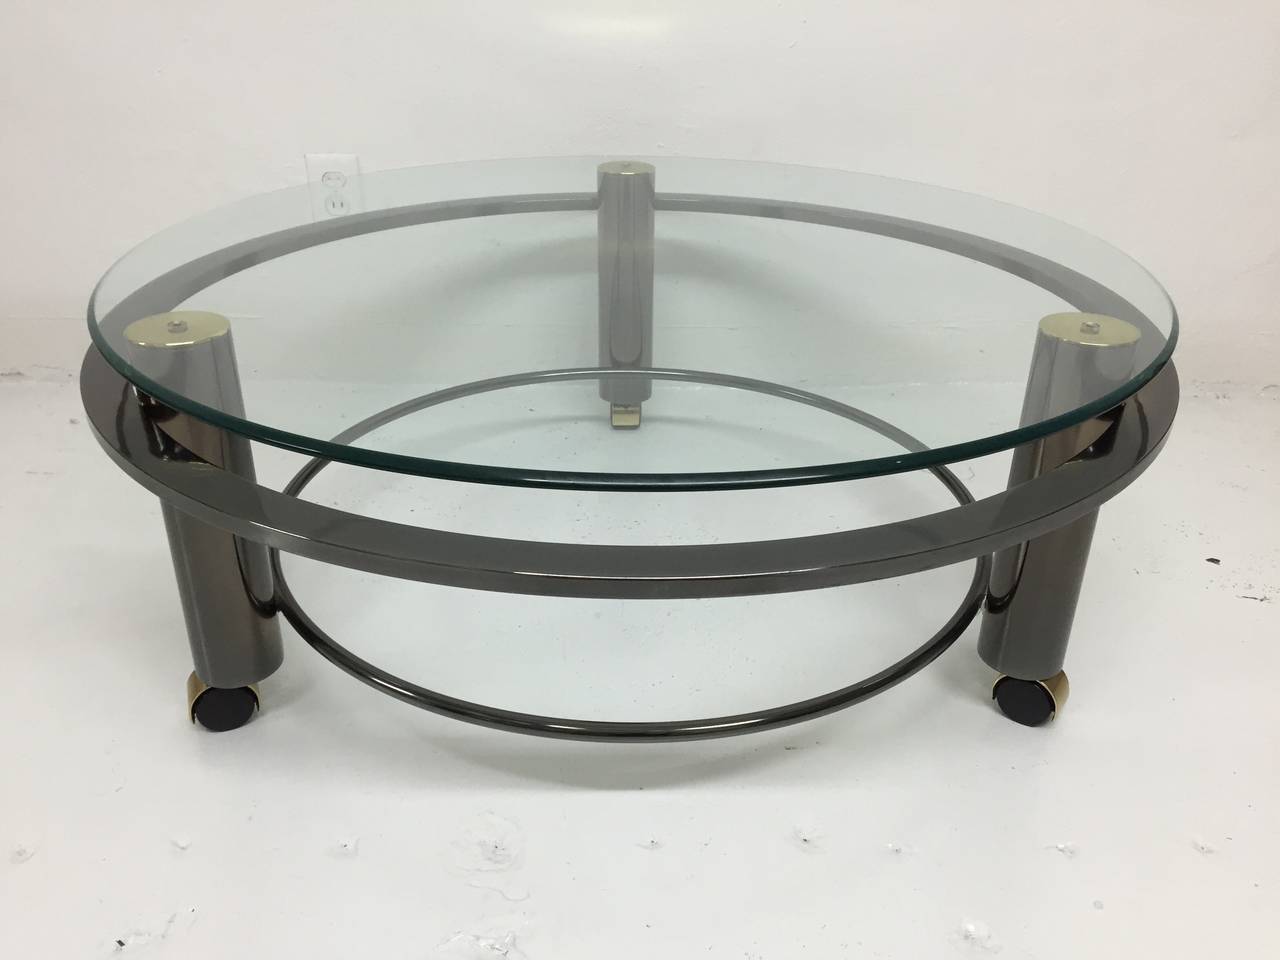 Gunmetal and brass circular coffee table on casters by DIA, Design Institute of America.